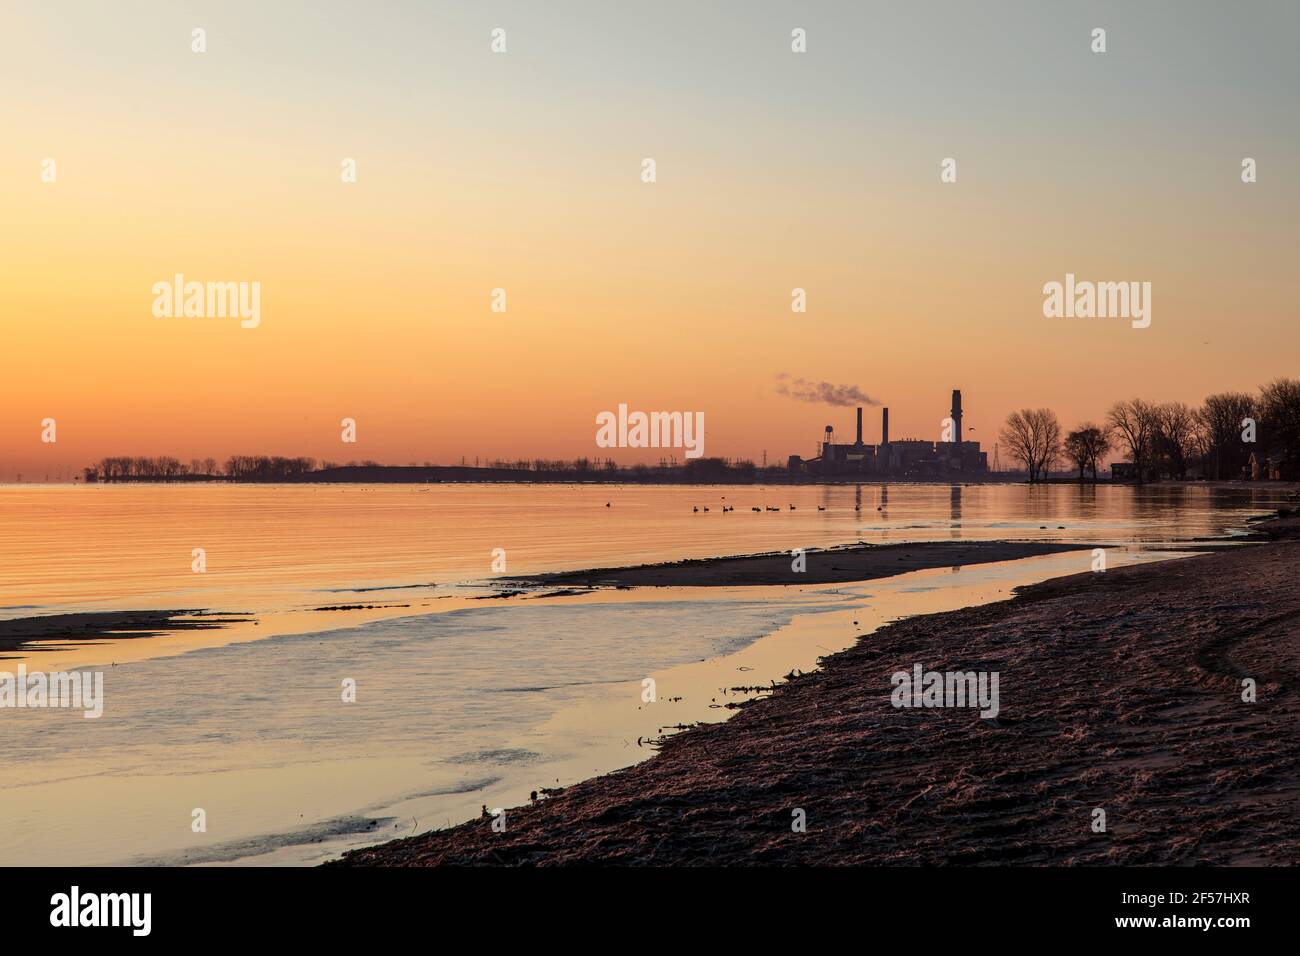 Sunrise over Saginaw bay, with Coal-fired energy plant, early spring, MI, USA, by James D Coppinger/Dembinsky Photo Assoc Stock Photo